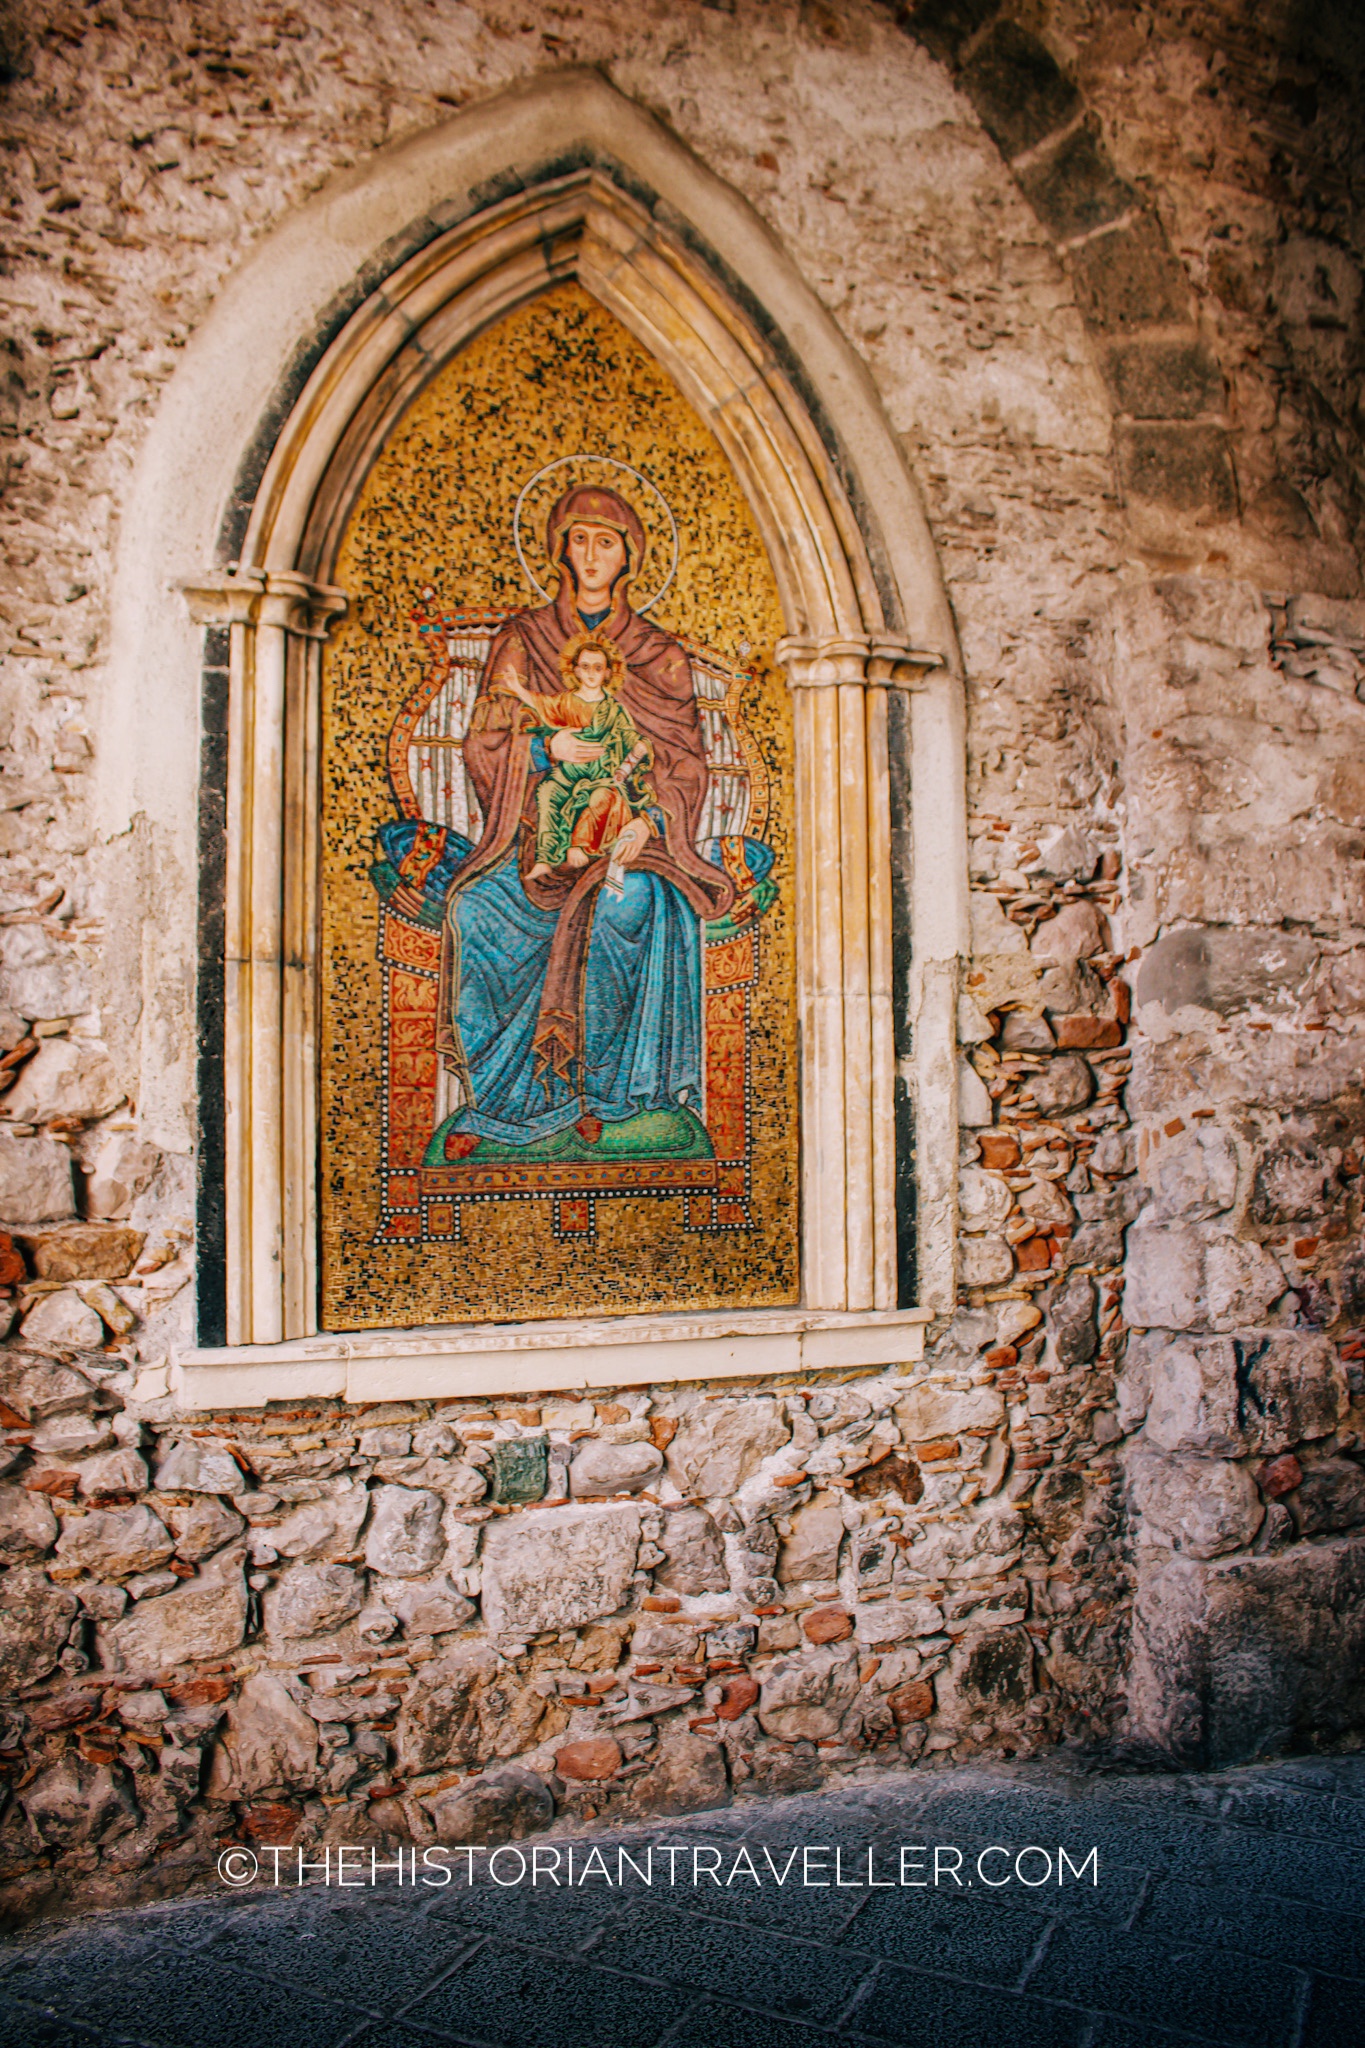 An insider's guide to Taormina - The Clock Tower and Byzantine Mosaic